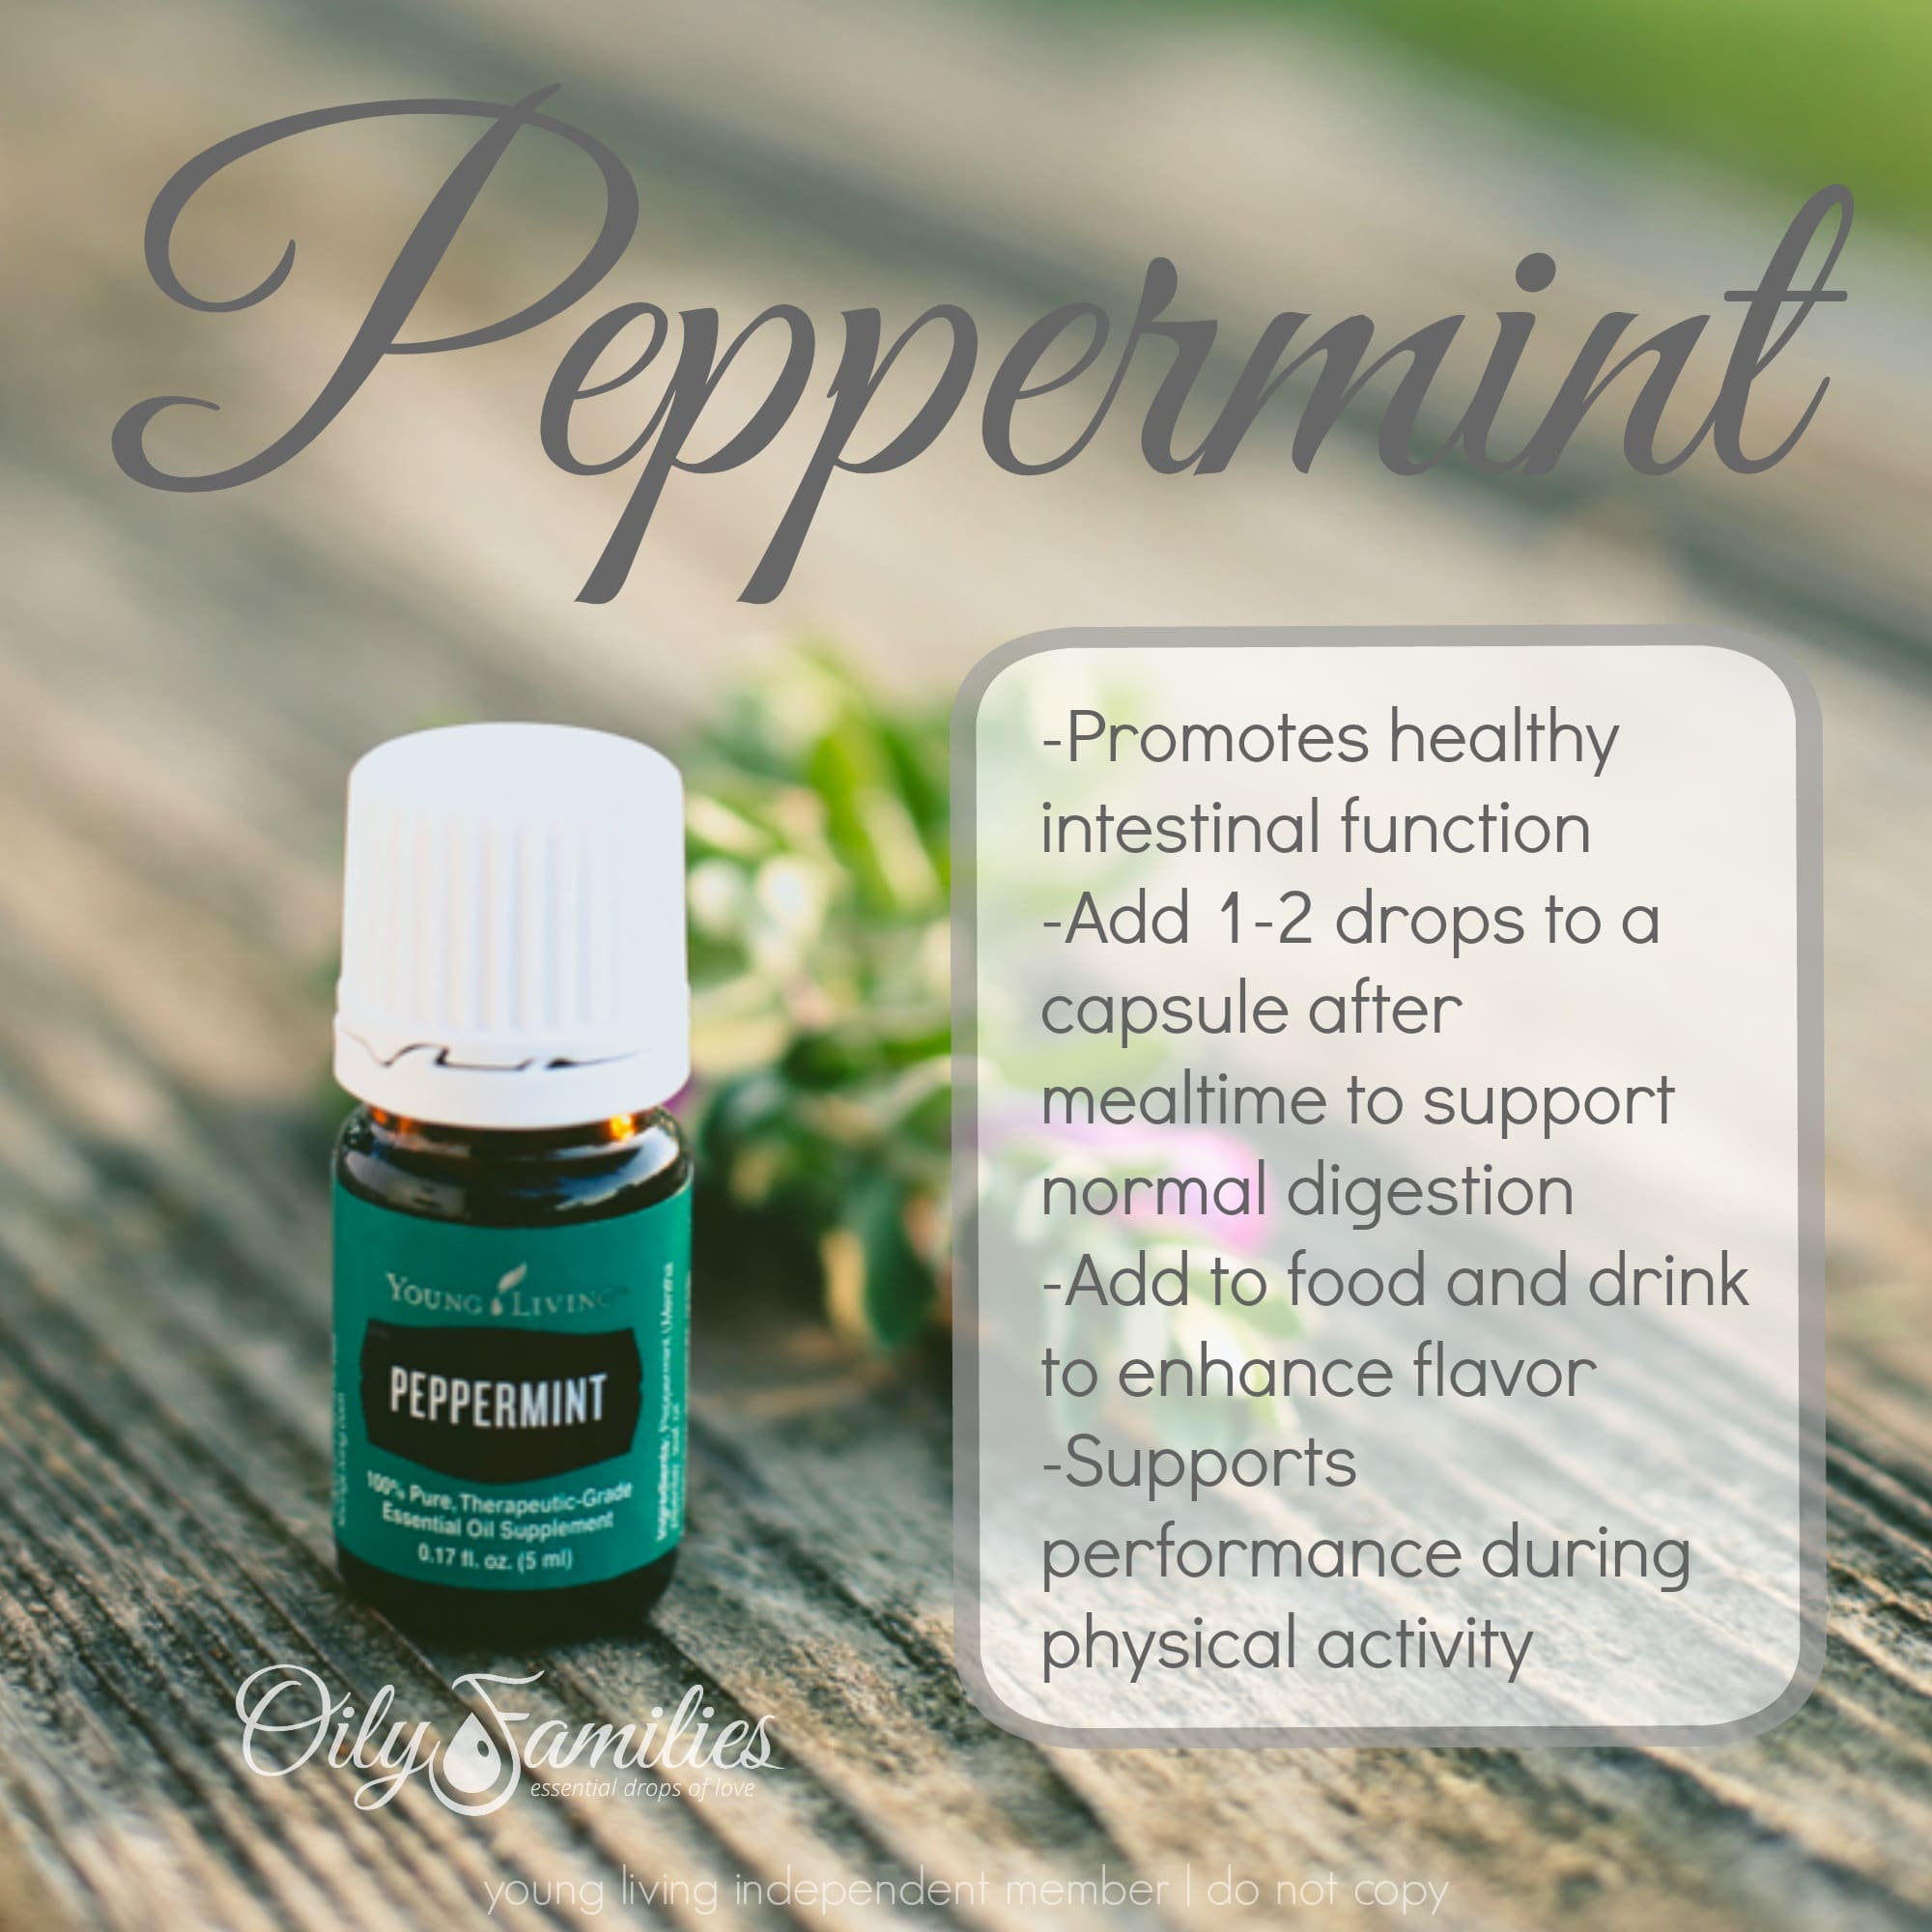 All About Peppermint Essential Oil